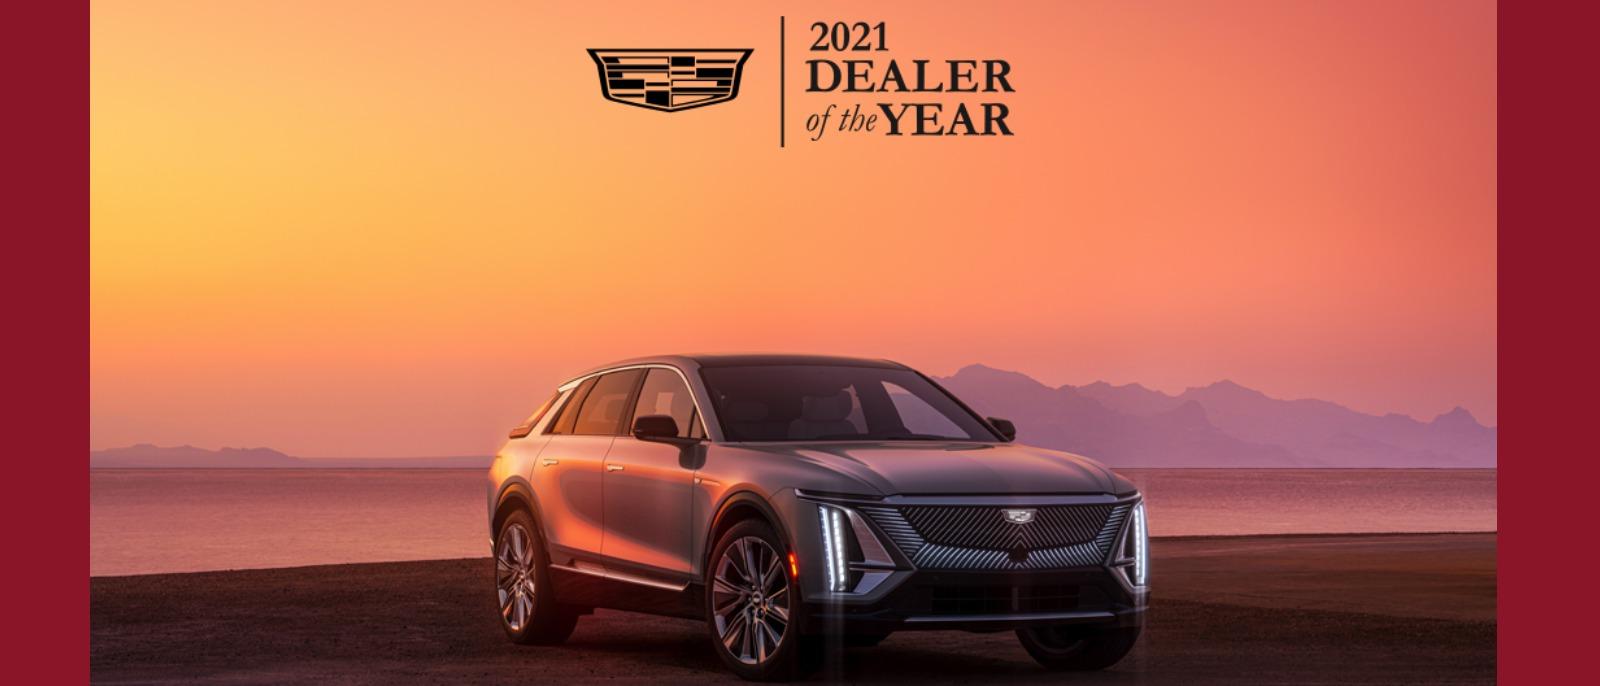 Cadillac Dealer of the Year